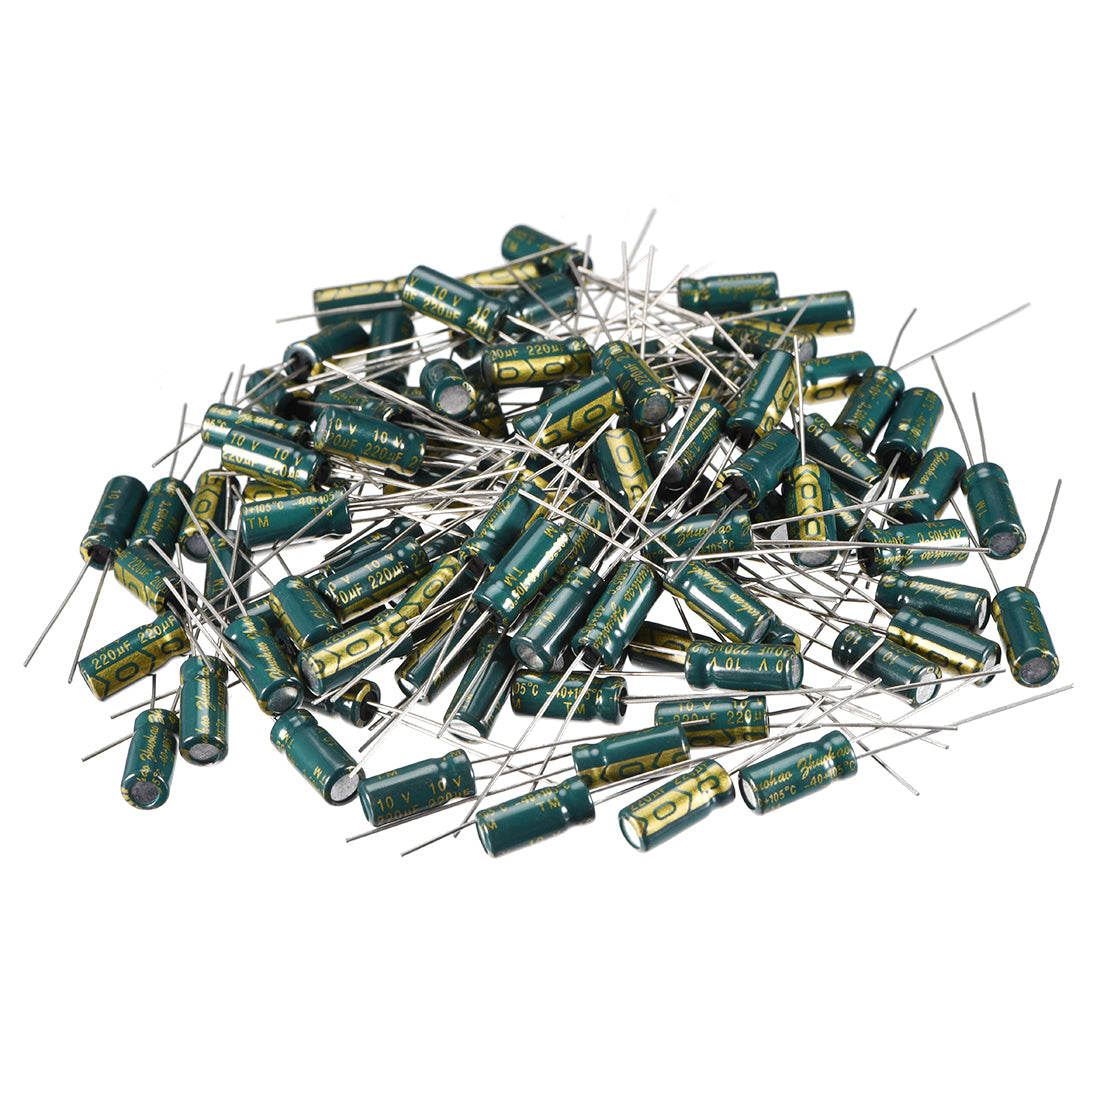 uxcell Uxcell Aluminum Radial Electrolytic Capacitor Low ESR Green with 220uF 10V 105 Celsius Life 3000H 5 x 11mm High Ripple Current,Low Impedance 100pcs